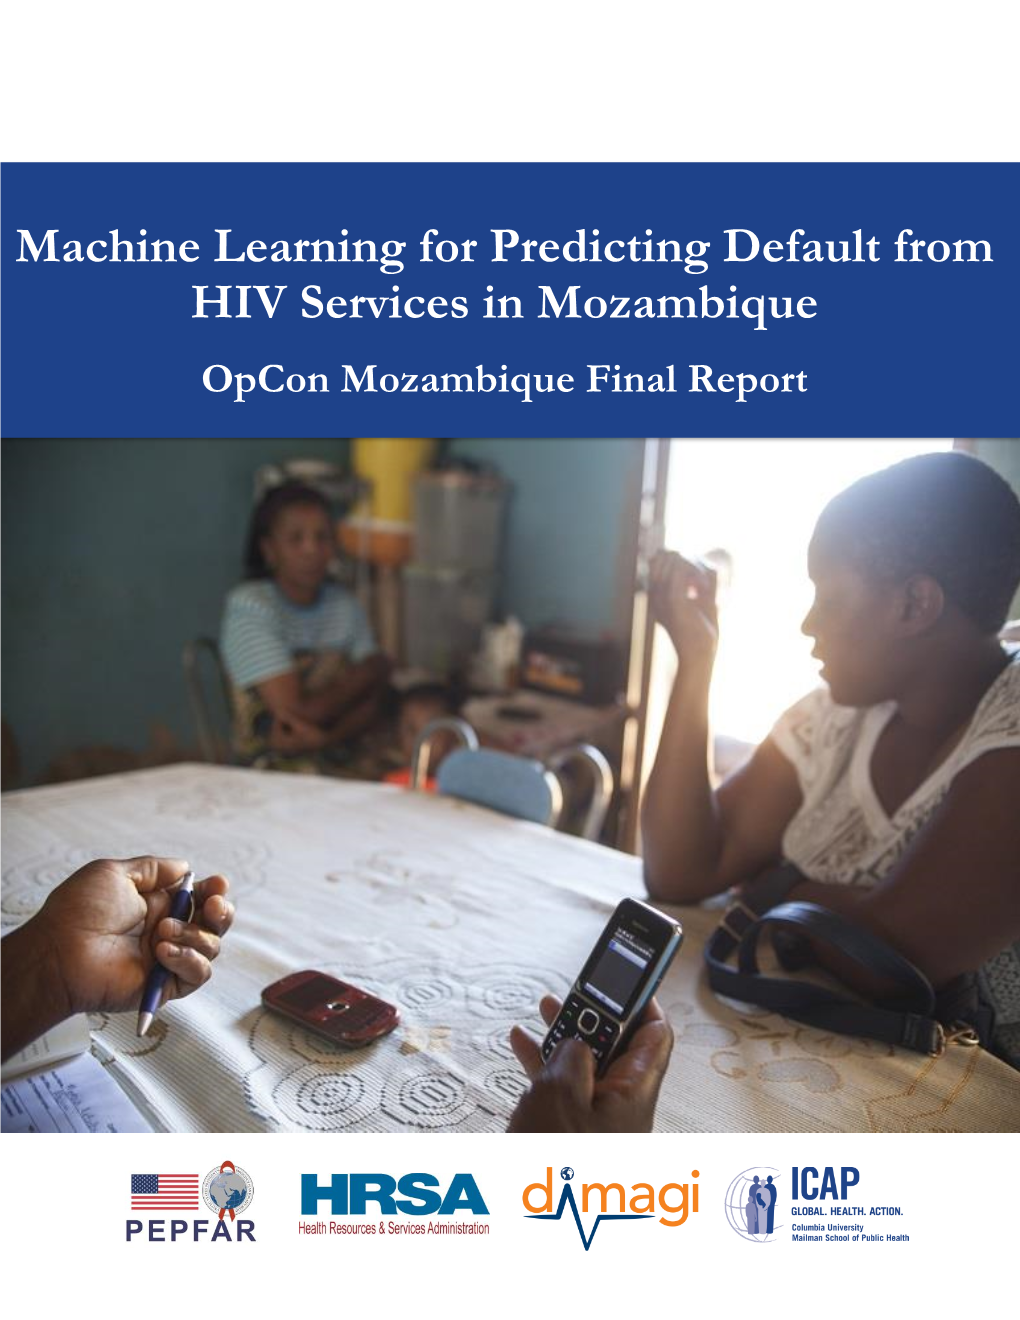 Machine Learning for Predicting Default from HIV Services in Mozambique Opcon Mozambique Final Report